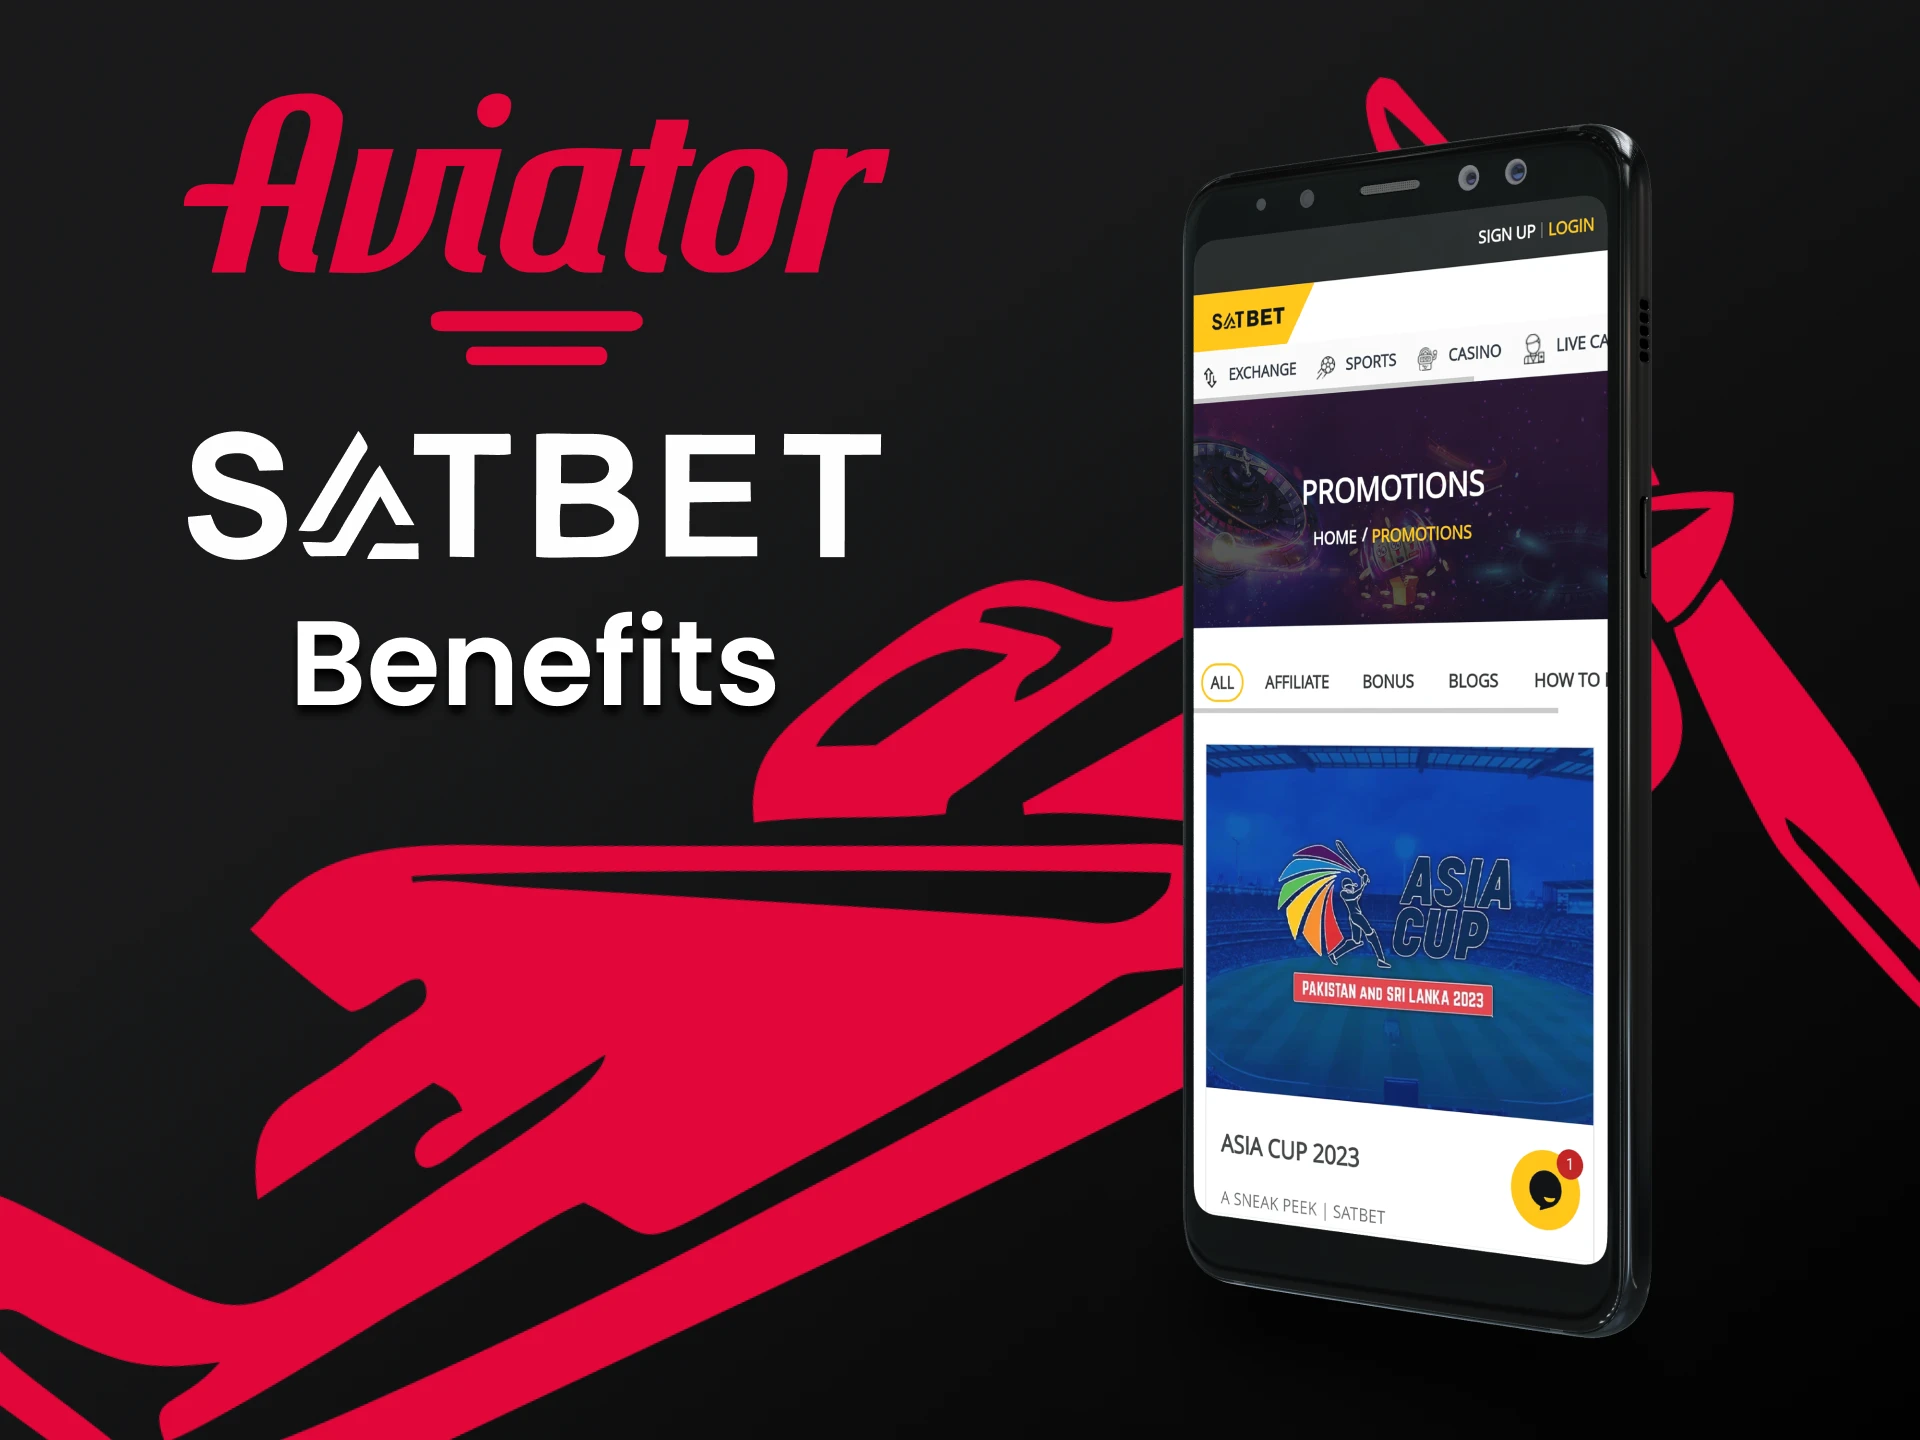 The Satbet app has many advantages for playing Aviator.